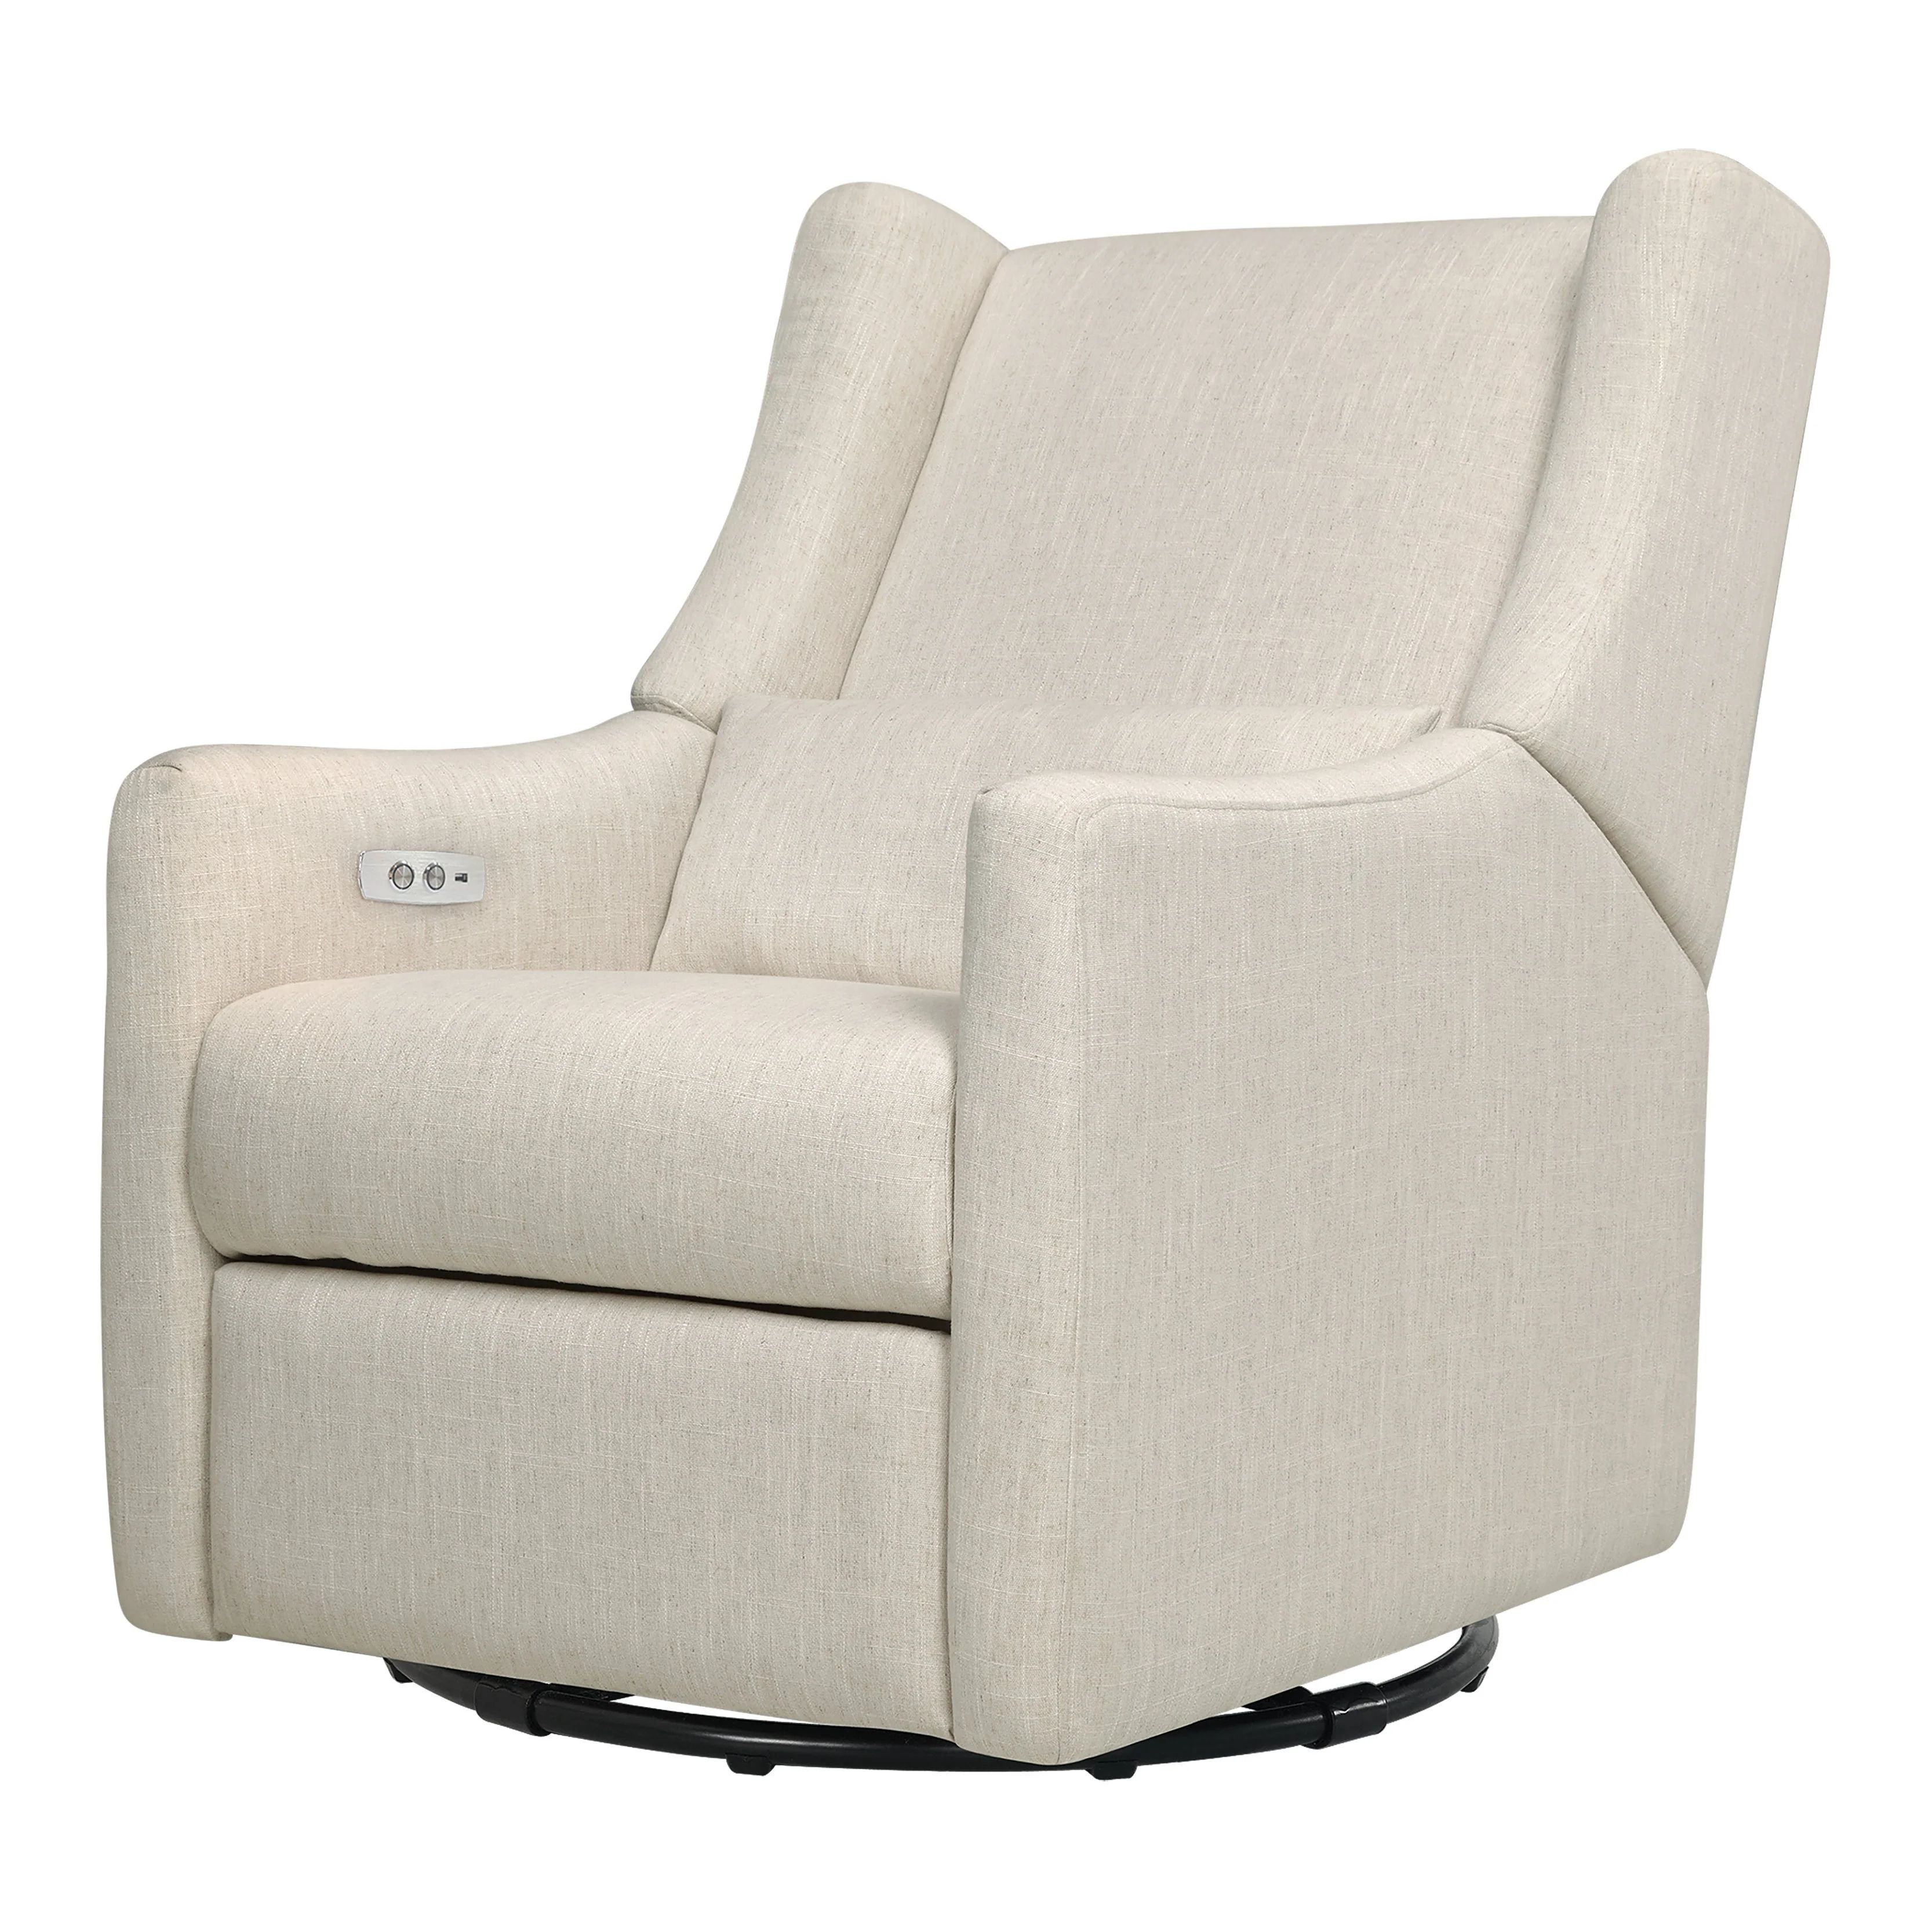 Kiwi Glider Recliner with Electronic/USB Control | Project Nursery